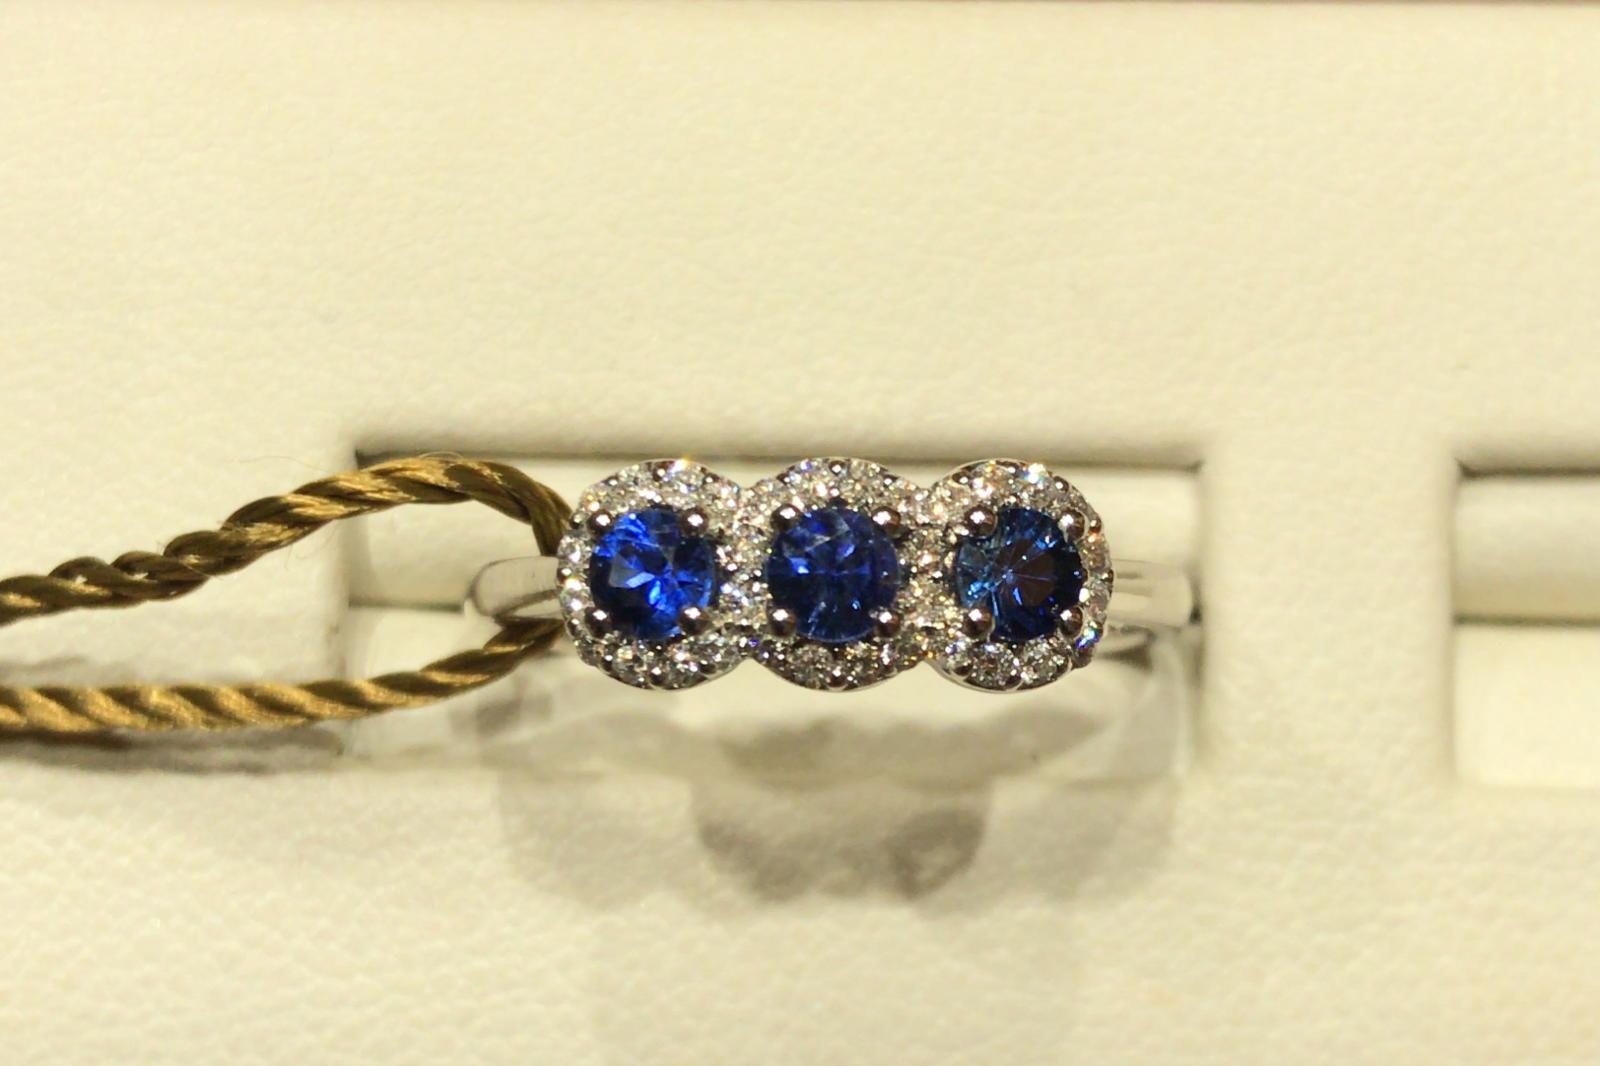 GOLD RING - SAPPHIRES AND DIAMONDS COD. ART. AN932